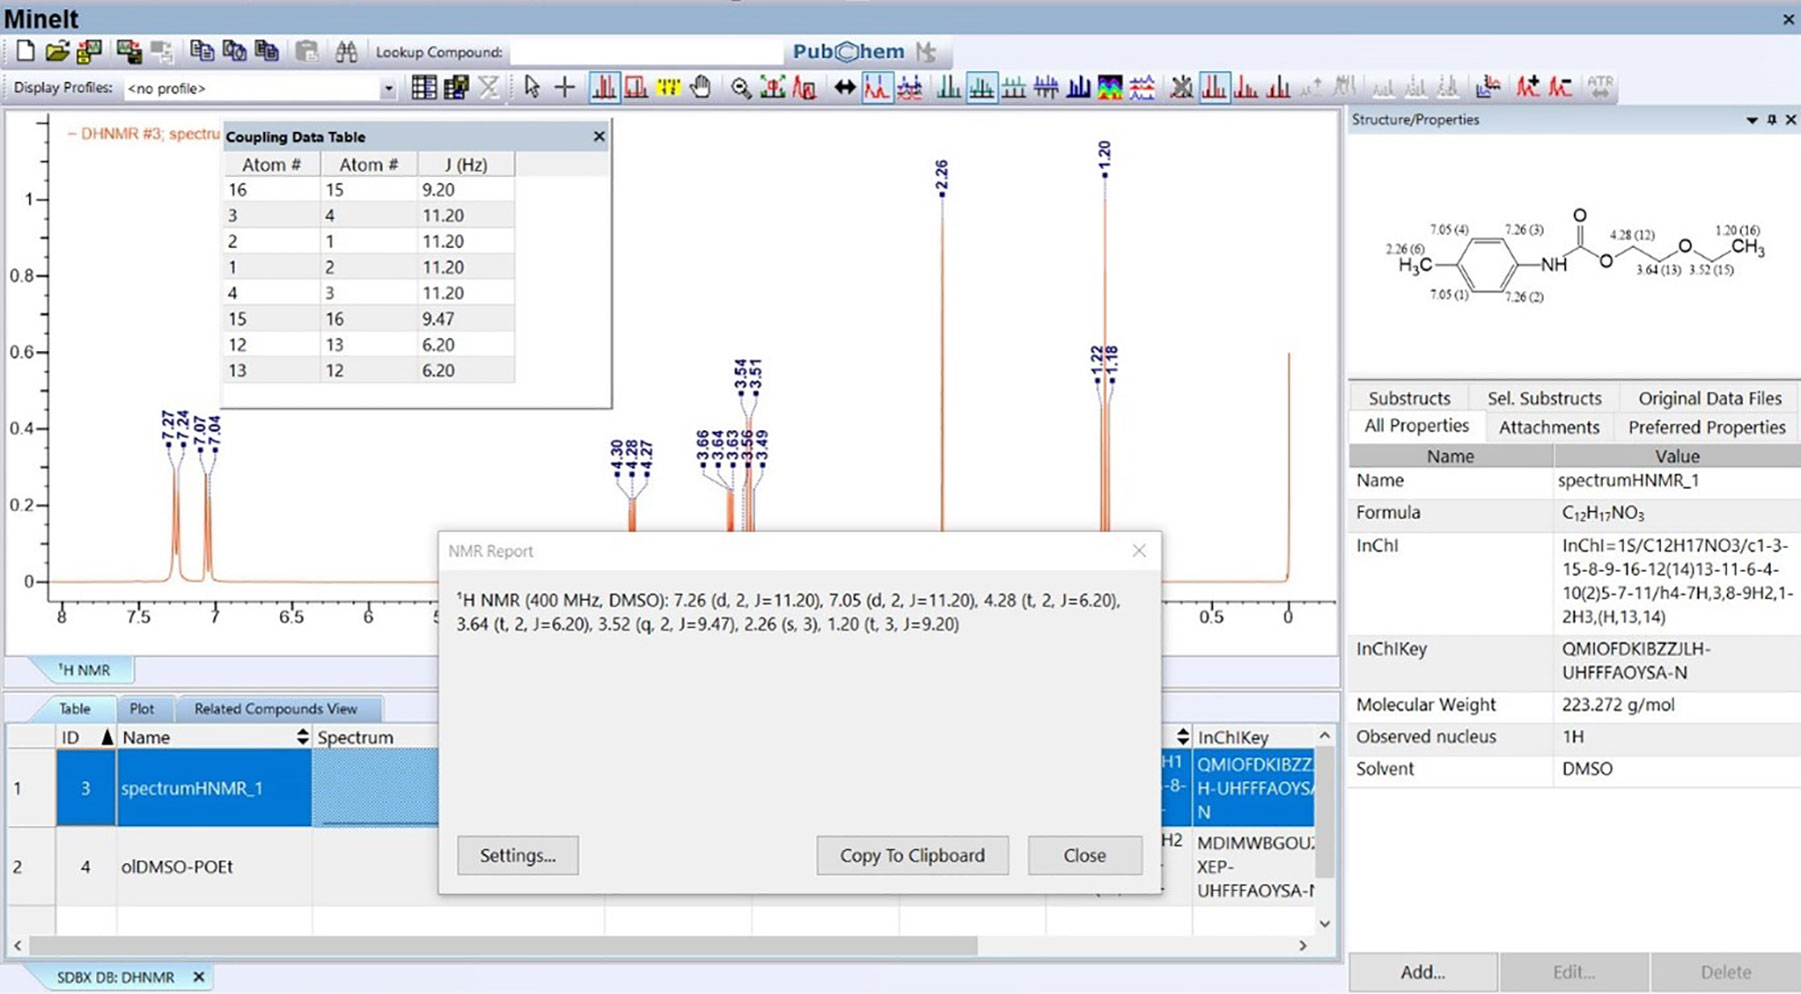 Wiley KnowItAll Solutions for NMR